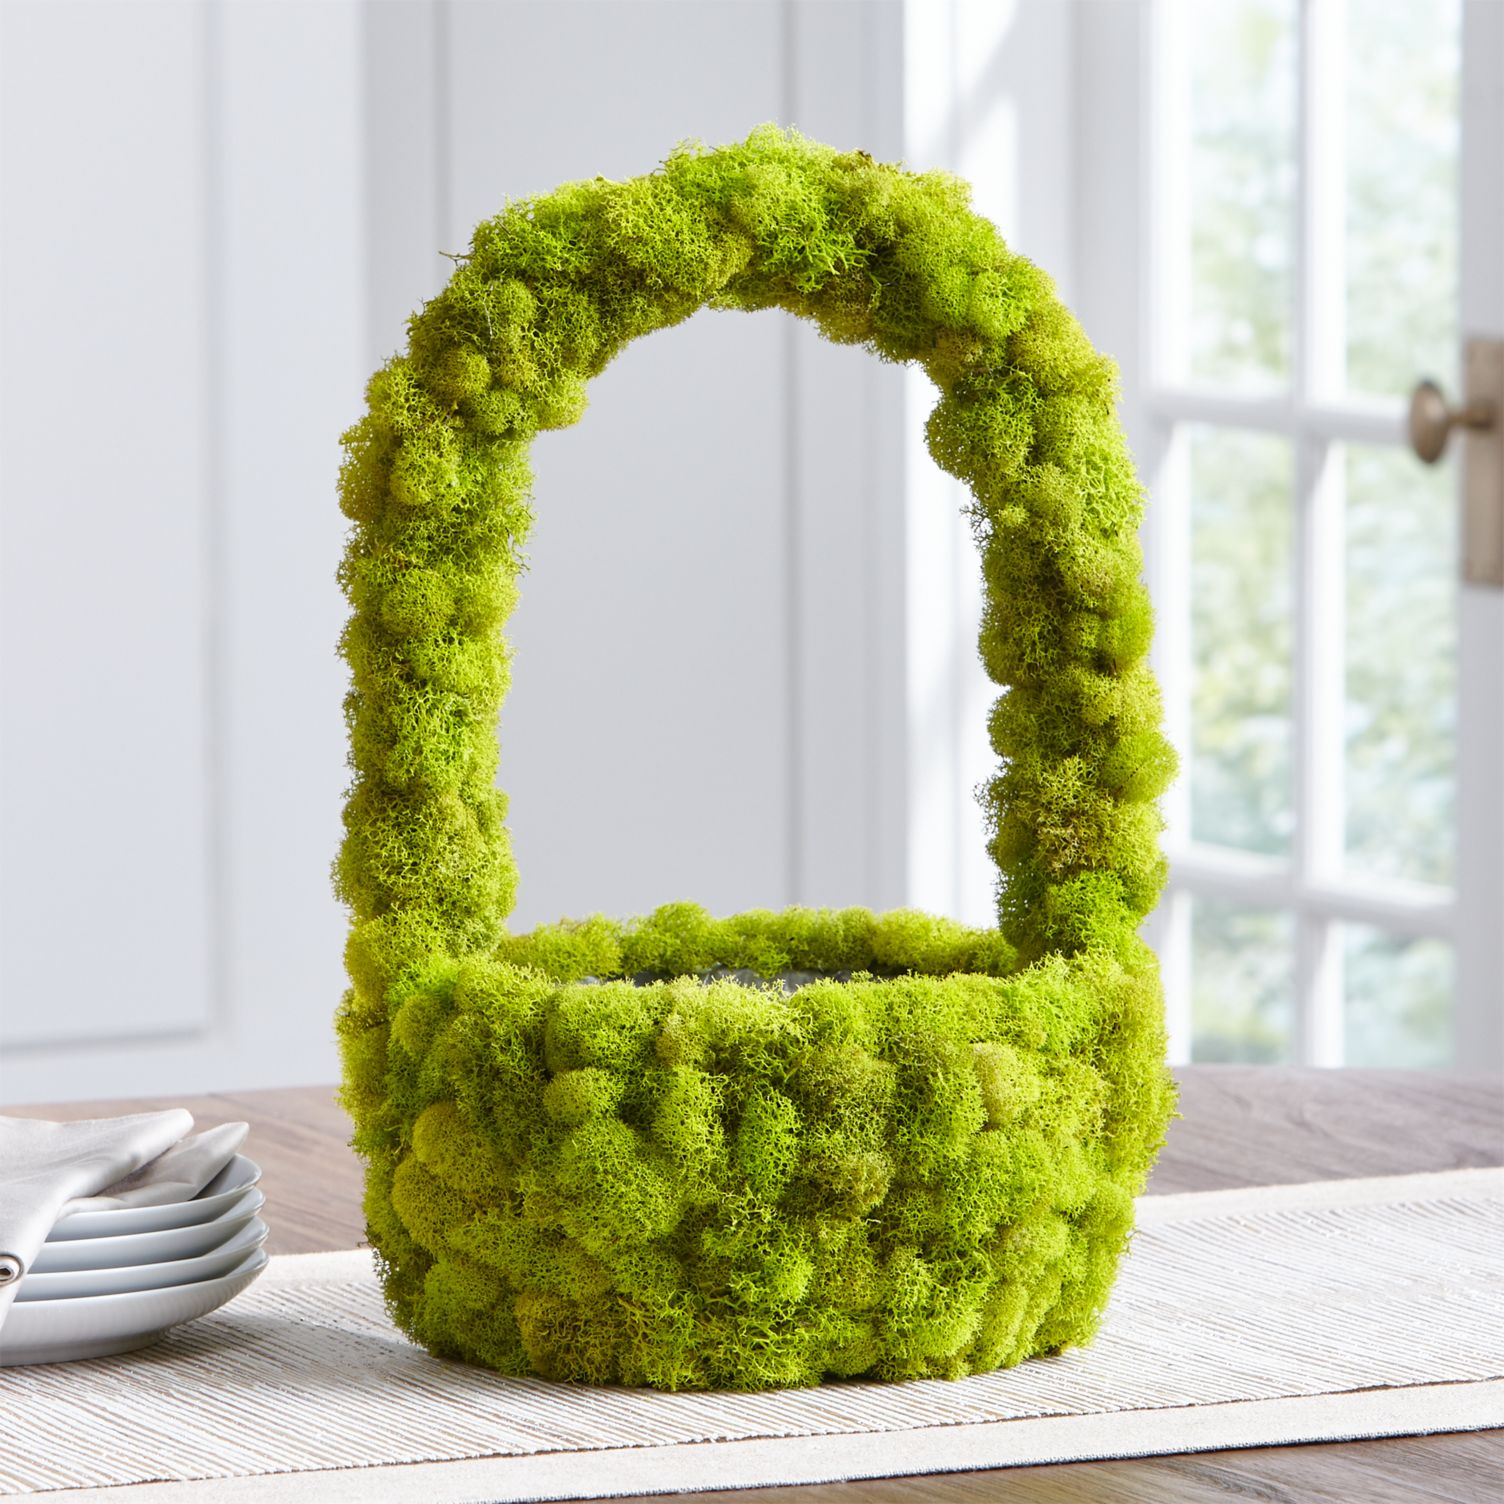 Moss Easter basket from Crate & Barrel